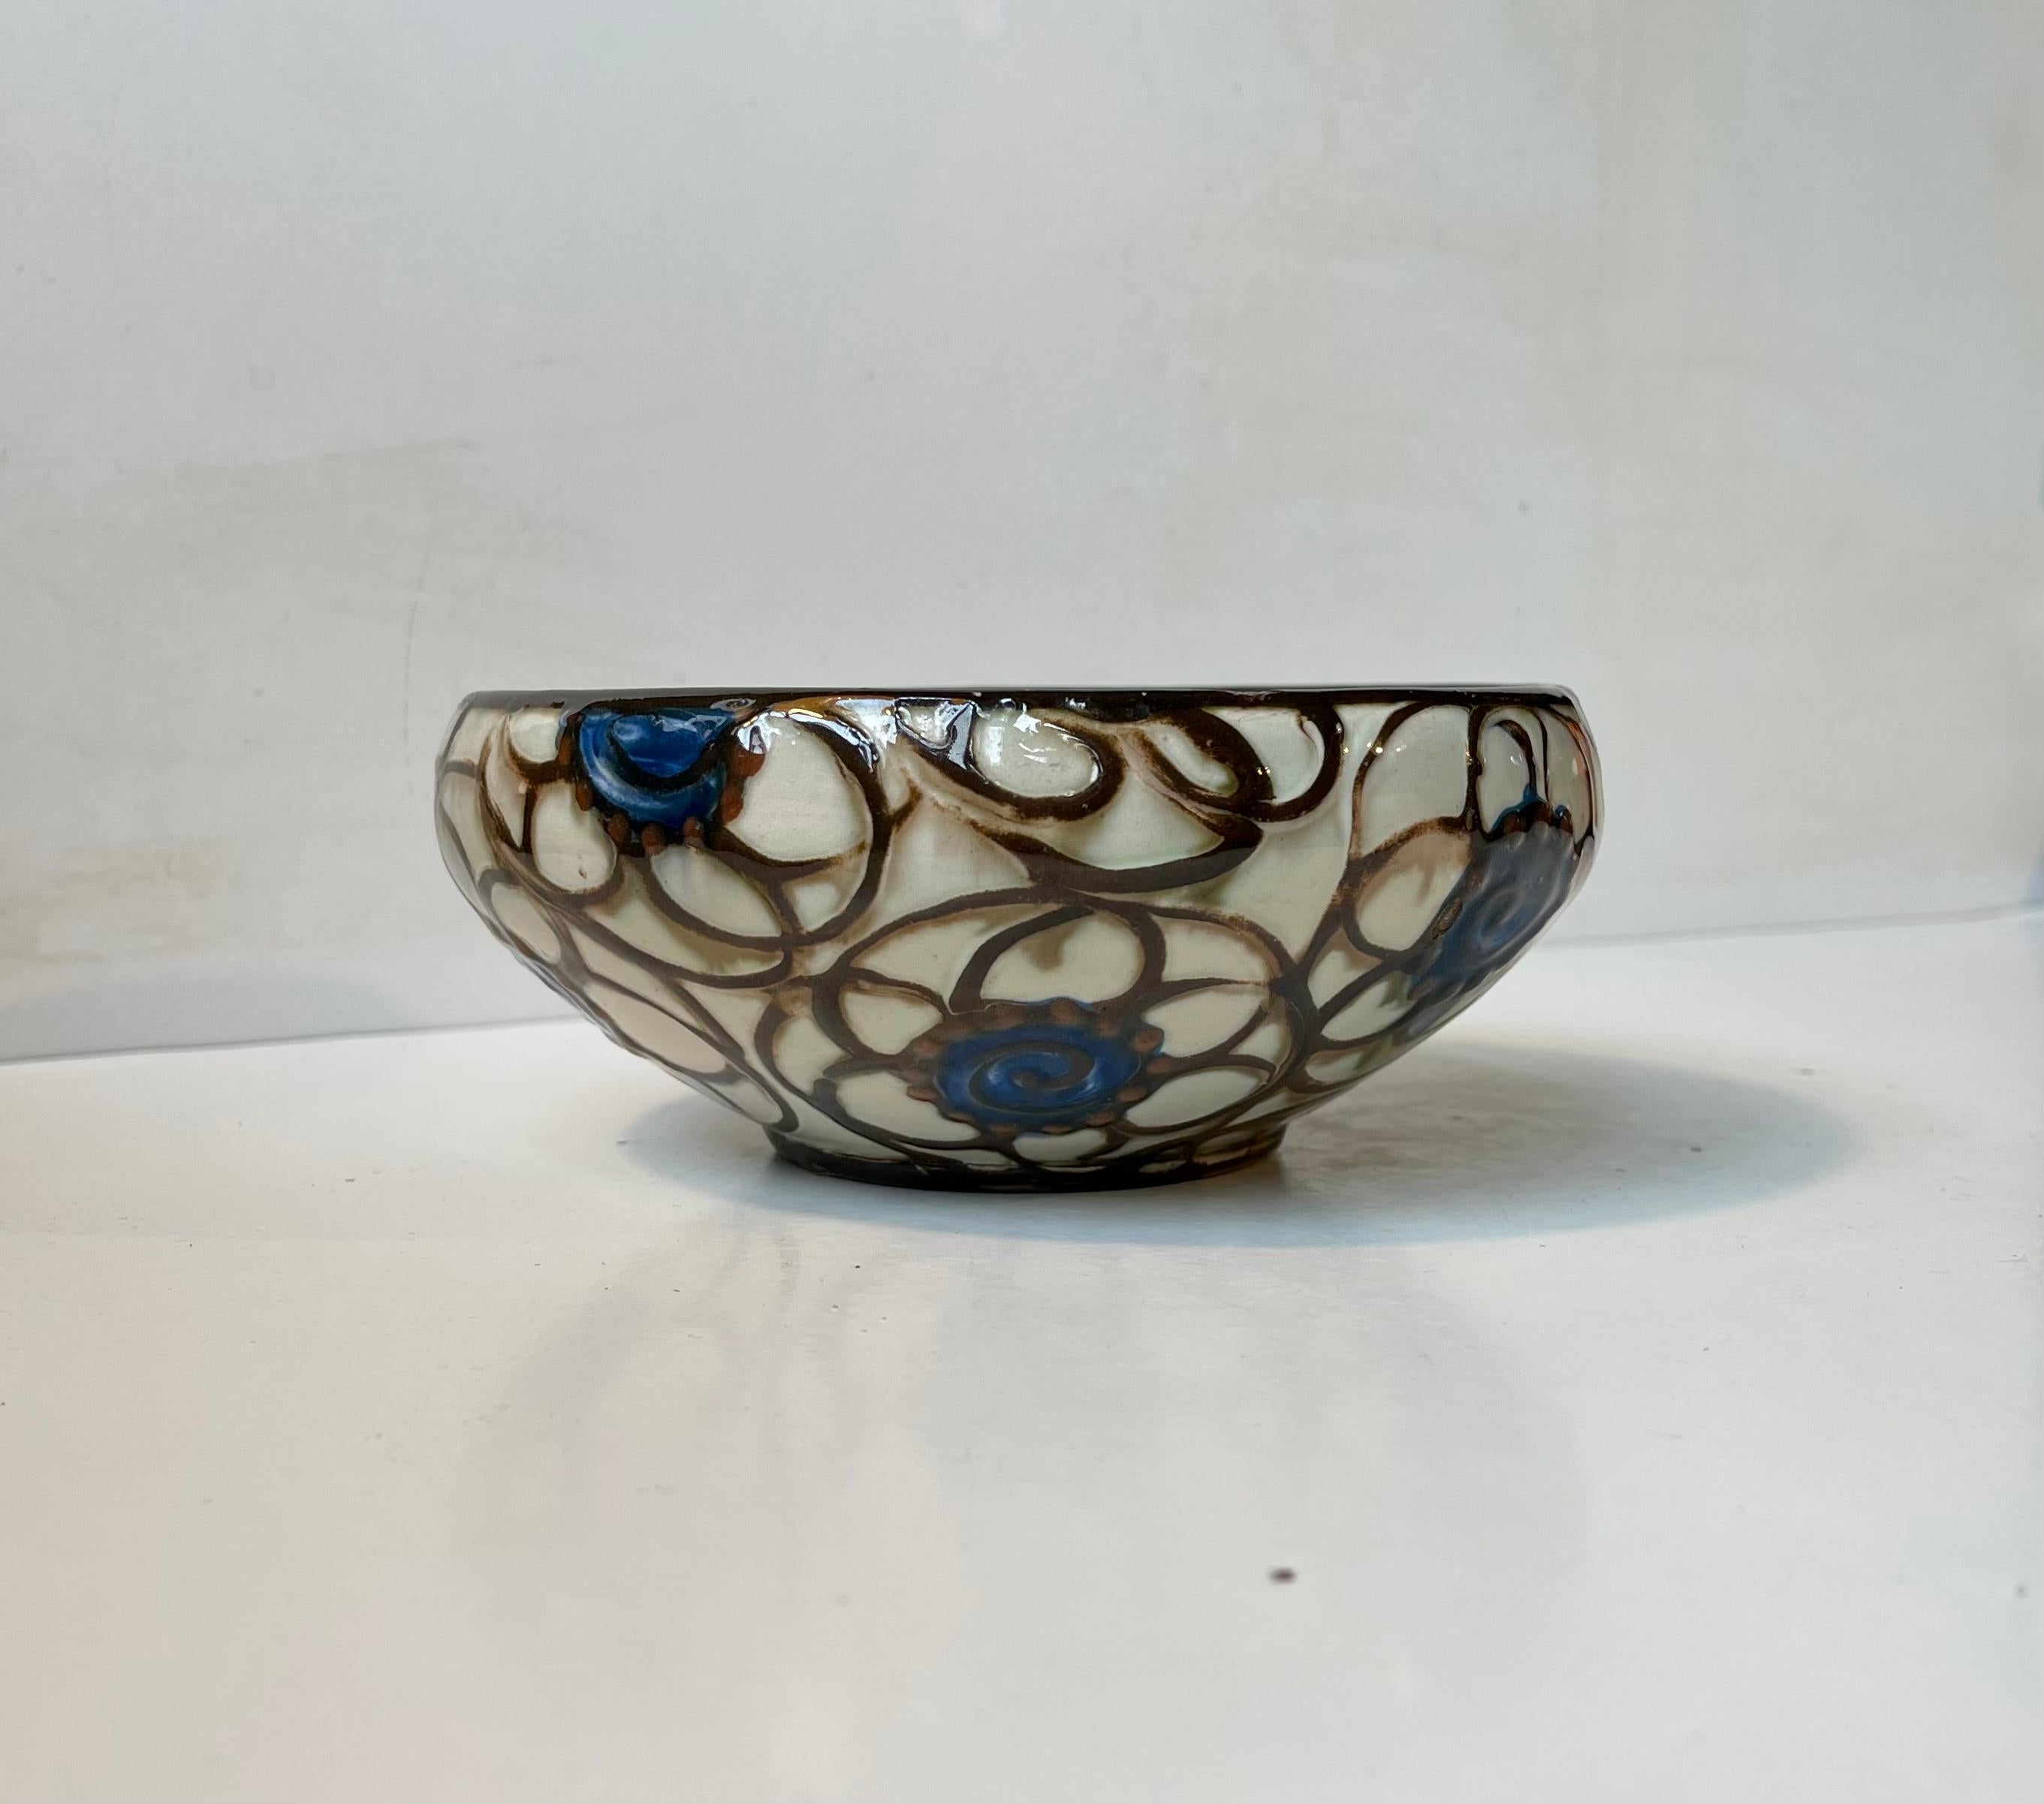 Fully glazed bowl with swirling brown stripes and blue flowers. The glaze has been applied through a cow horn - distinct Kähler Technique. Made by Herman August Kähler circa 1915-25. Signed HAK - Denmark to the base. Measurements: D: 17 cm, H: 7